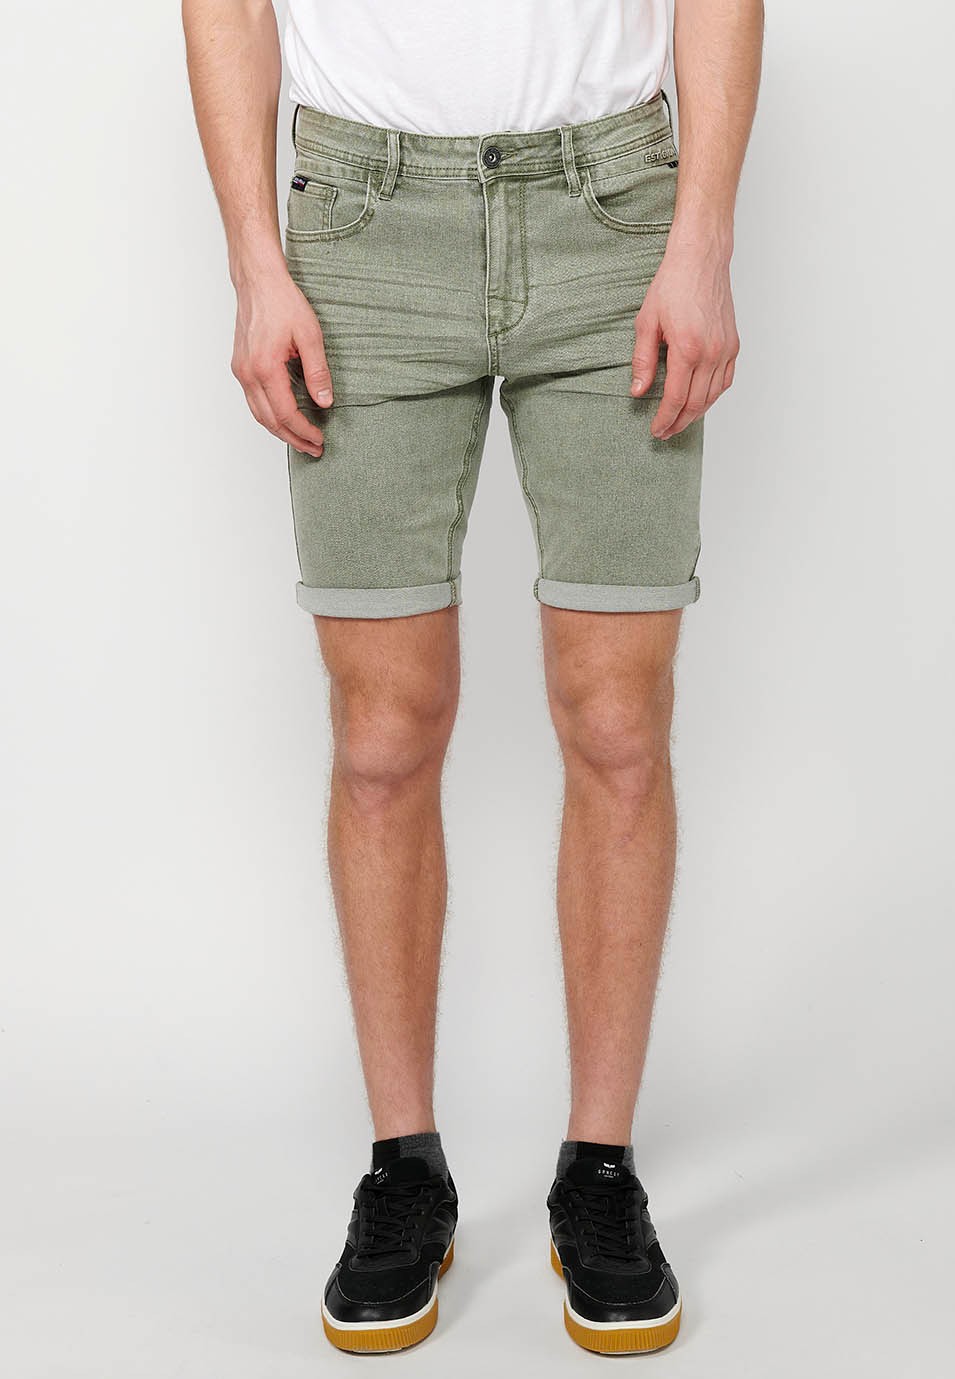 Shorts with a turn-up finish with front zipper and button closure and five pockets, one with a match pocket, in Green for Men 4